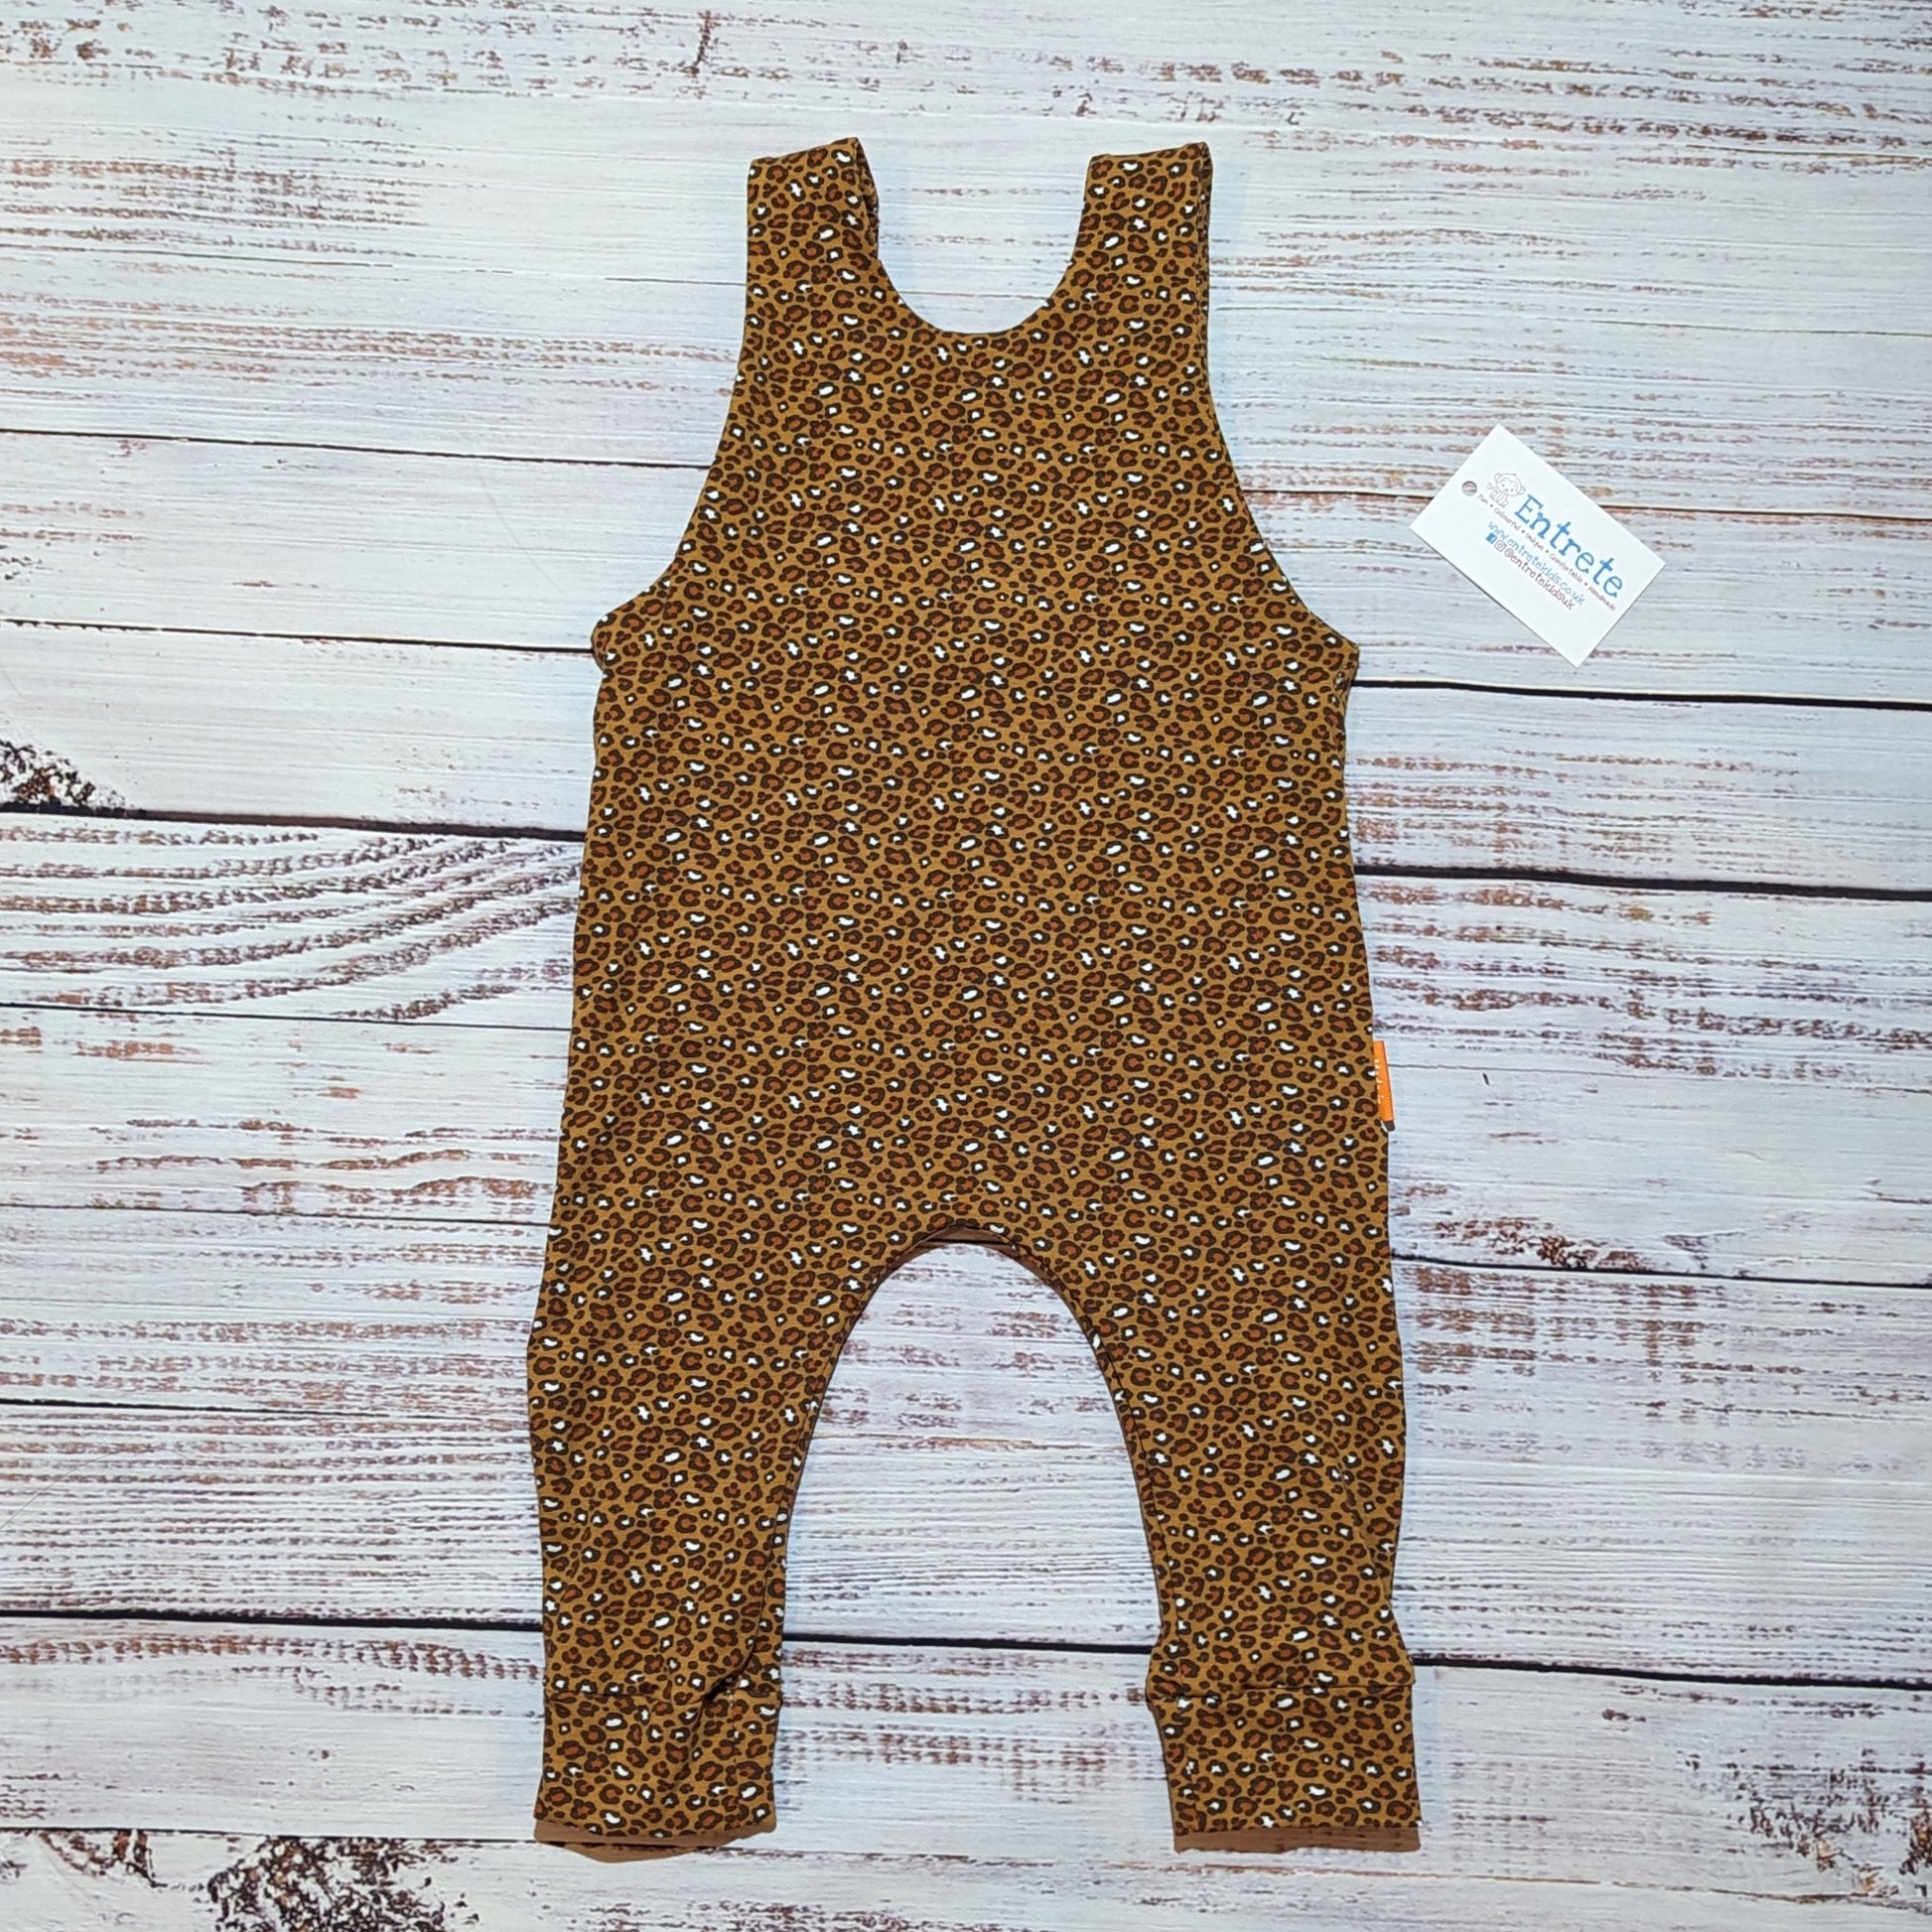 The stylish camel leopard print sleeveless romper. Handmade using soft and comfortable organic cotton jersey. Shown from the rear.